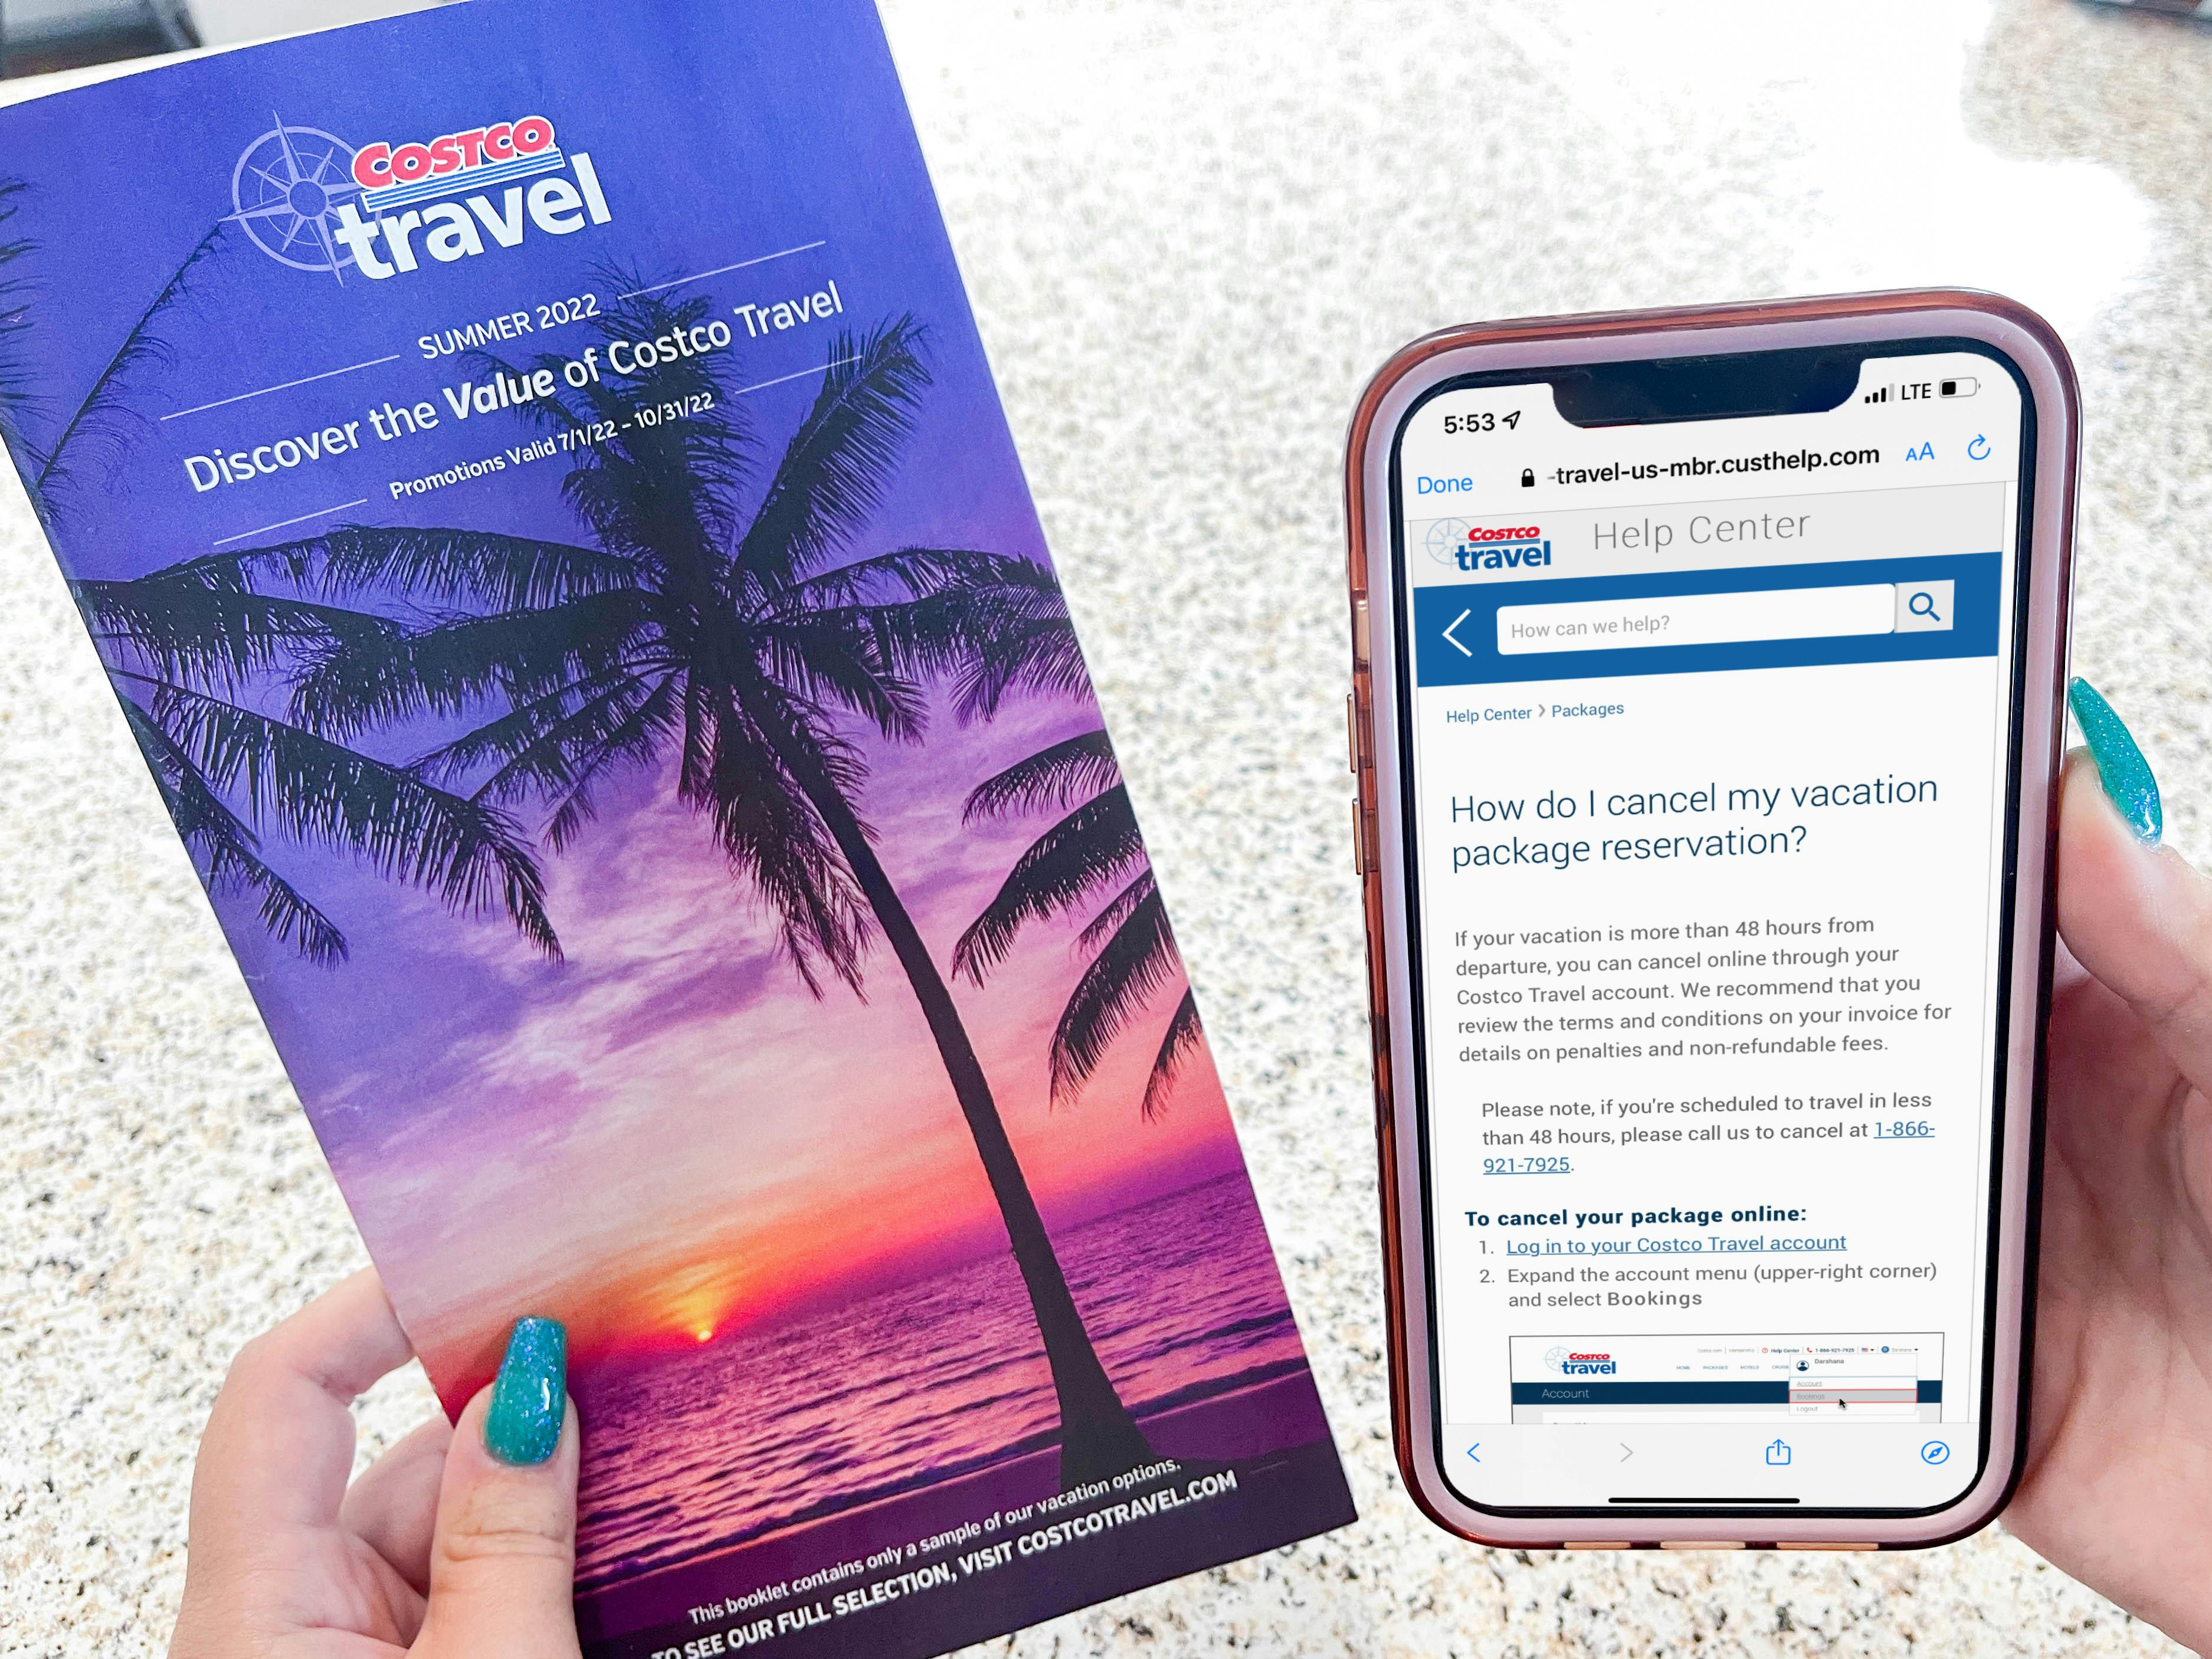 a person holding a costco travel brochure and cellphone with travel app on screen